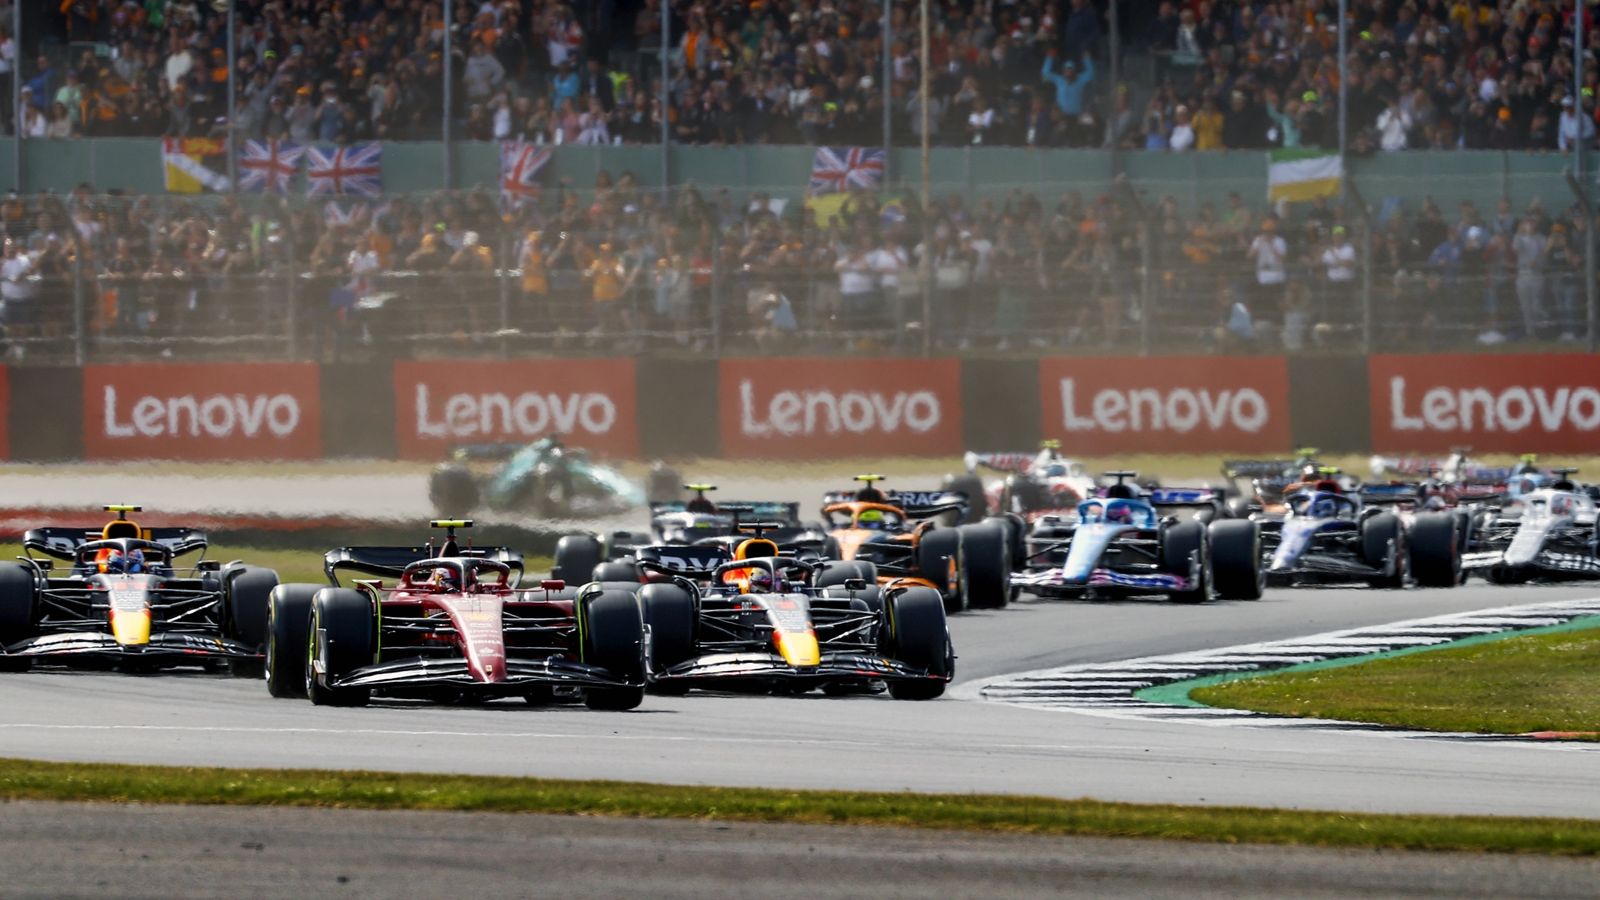 British Grand Prix: Six charged after protesters invaded Silverstone track during opening lap